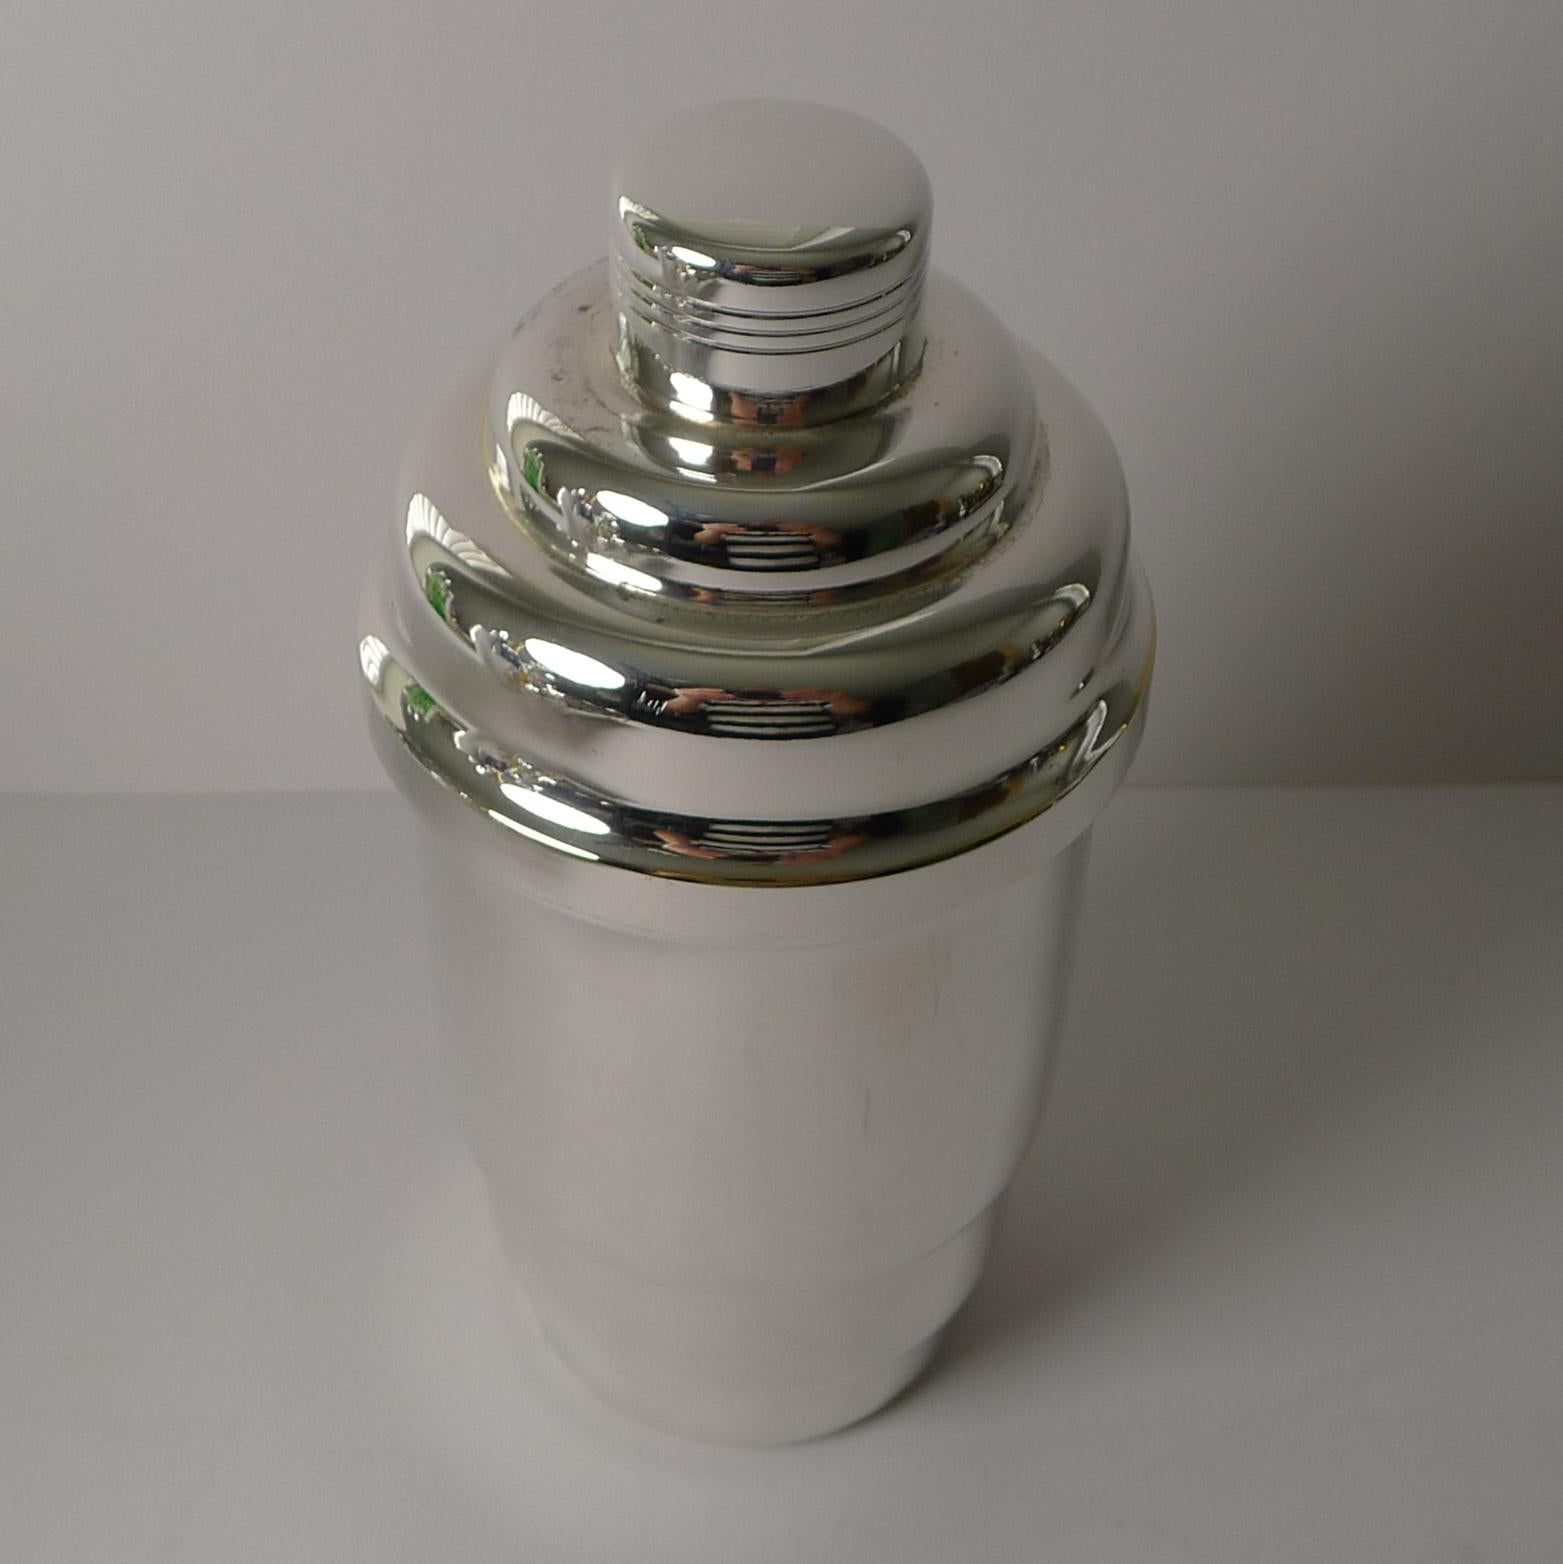 A fabulous looking silver plated cocktail shaker, a striking, bold shape to adorn the finest of bars.

French in origin and dating to the 1930's. Just back from our silversmith's workshop, it has been professionally cleaned and polished, restoring